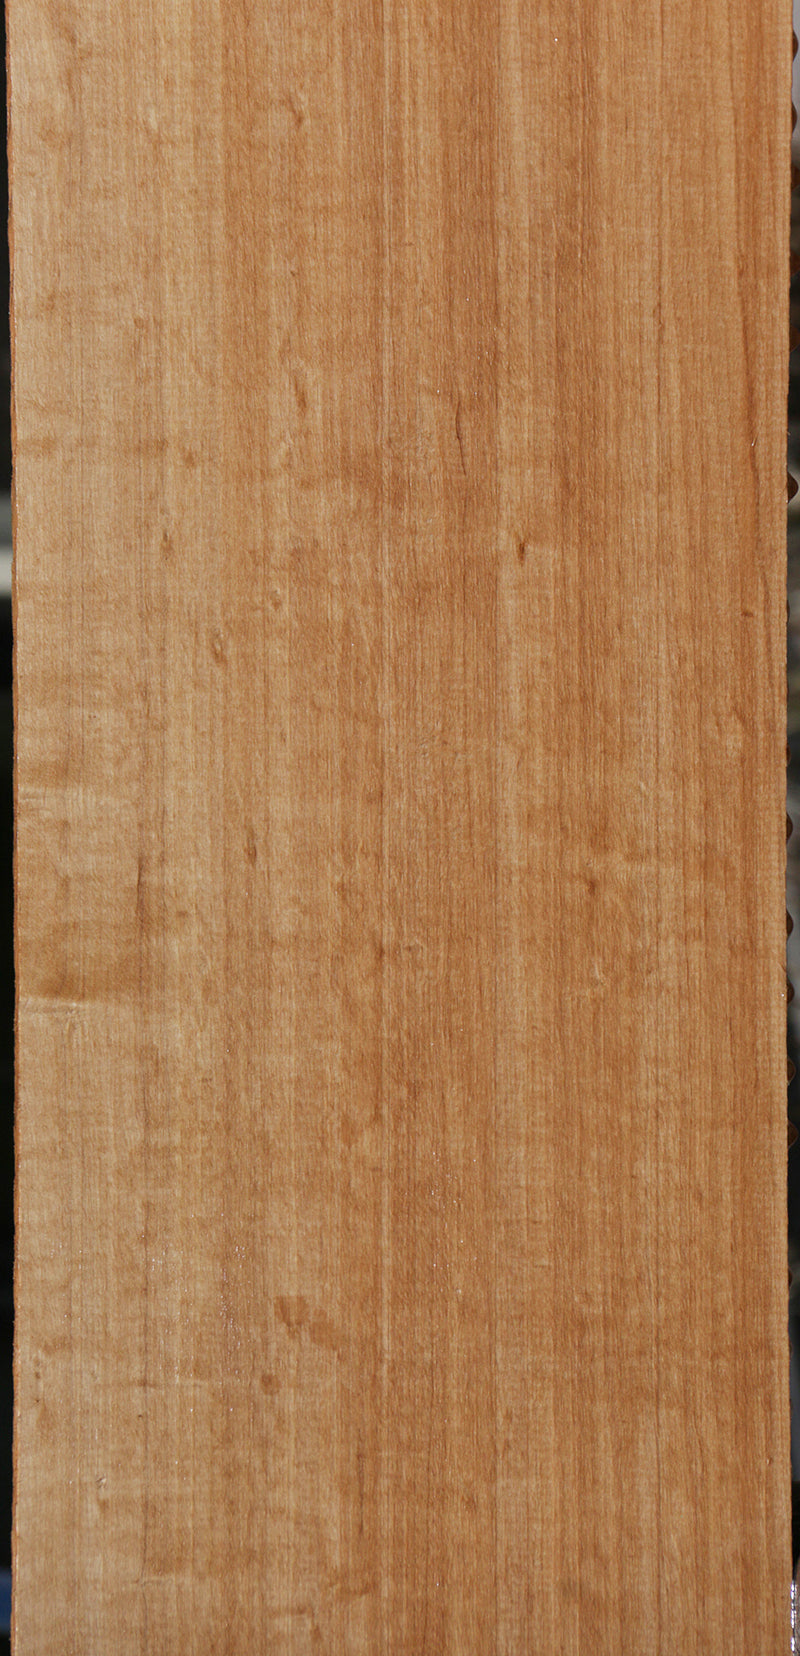 Extra Fancy Aniegre Lumber (Free Shipping Excluded)